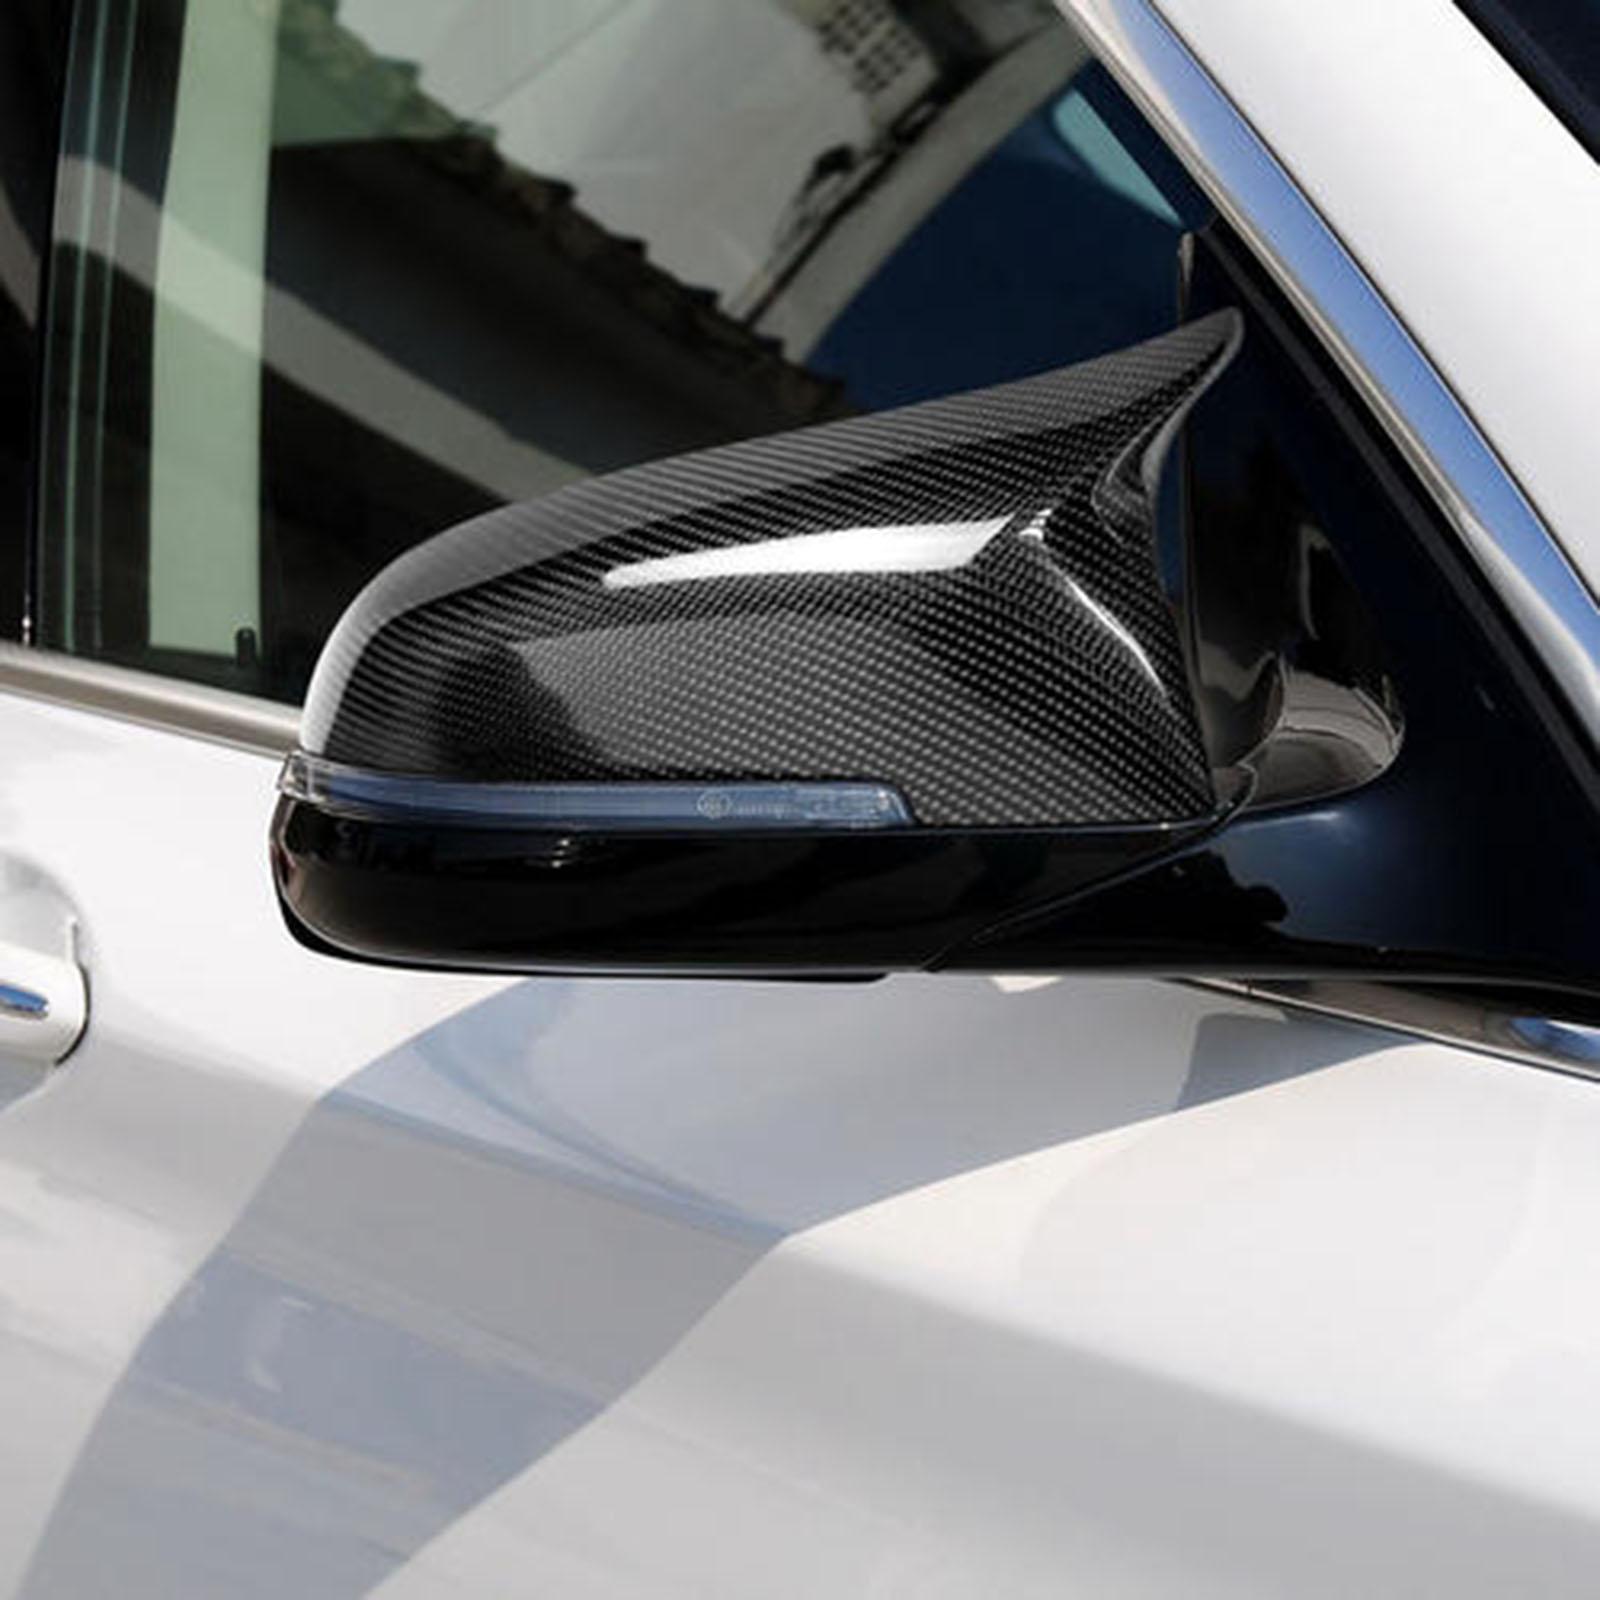 Hình ảnh 1 Pair of Carbon Fiber Rearview Mirror Cover Cap for  E84 F20 F21 F22 F30 F32 F33 F36 X1 M3, Protect Your Rearview Mirror From Damage.